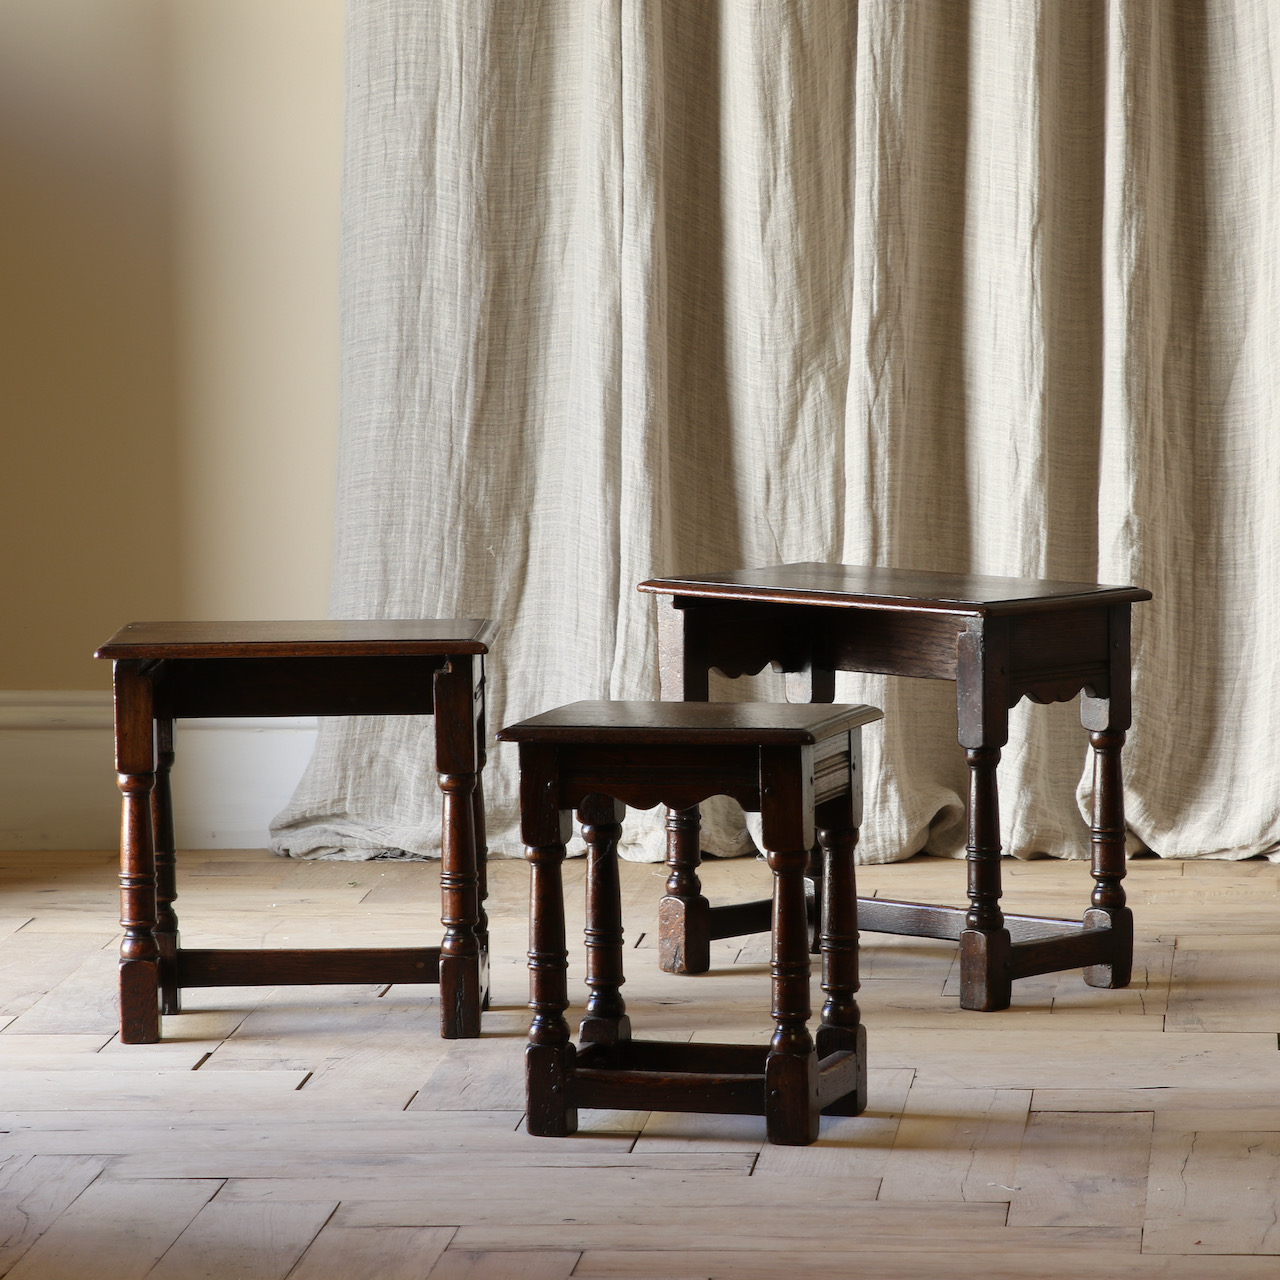 A Set of Three Jointed Stools